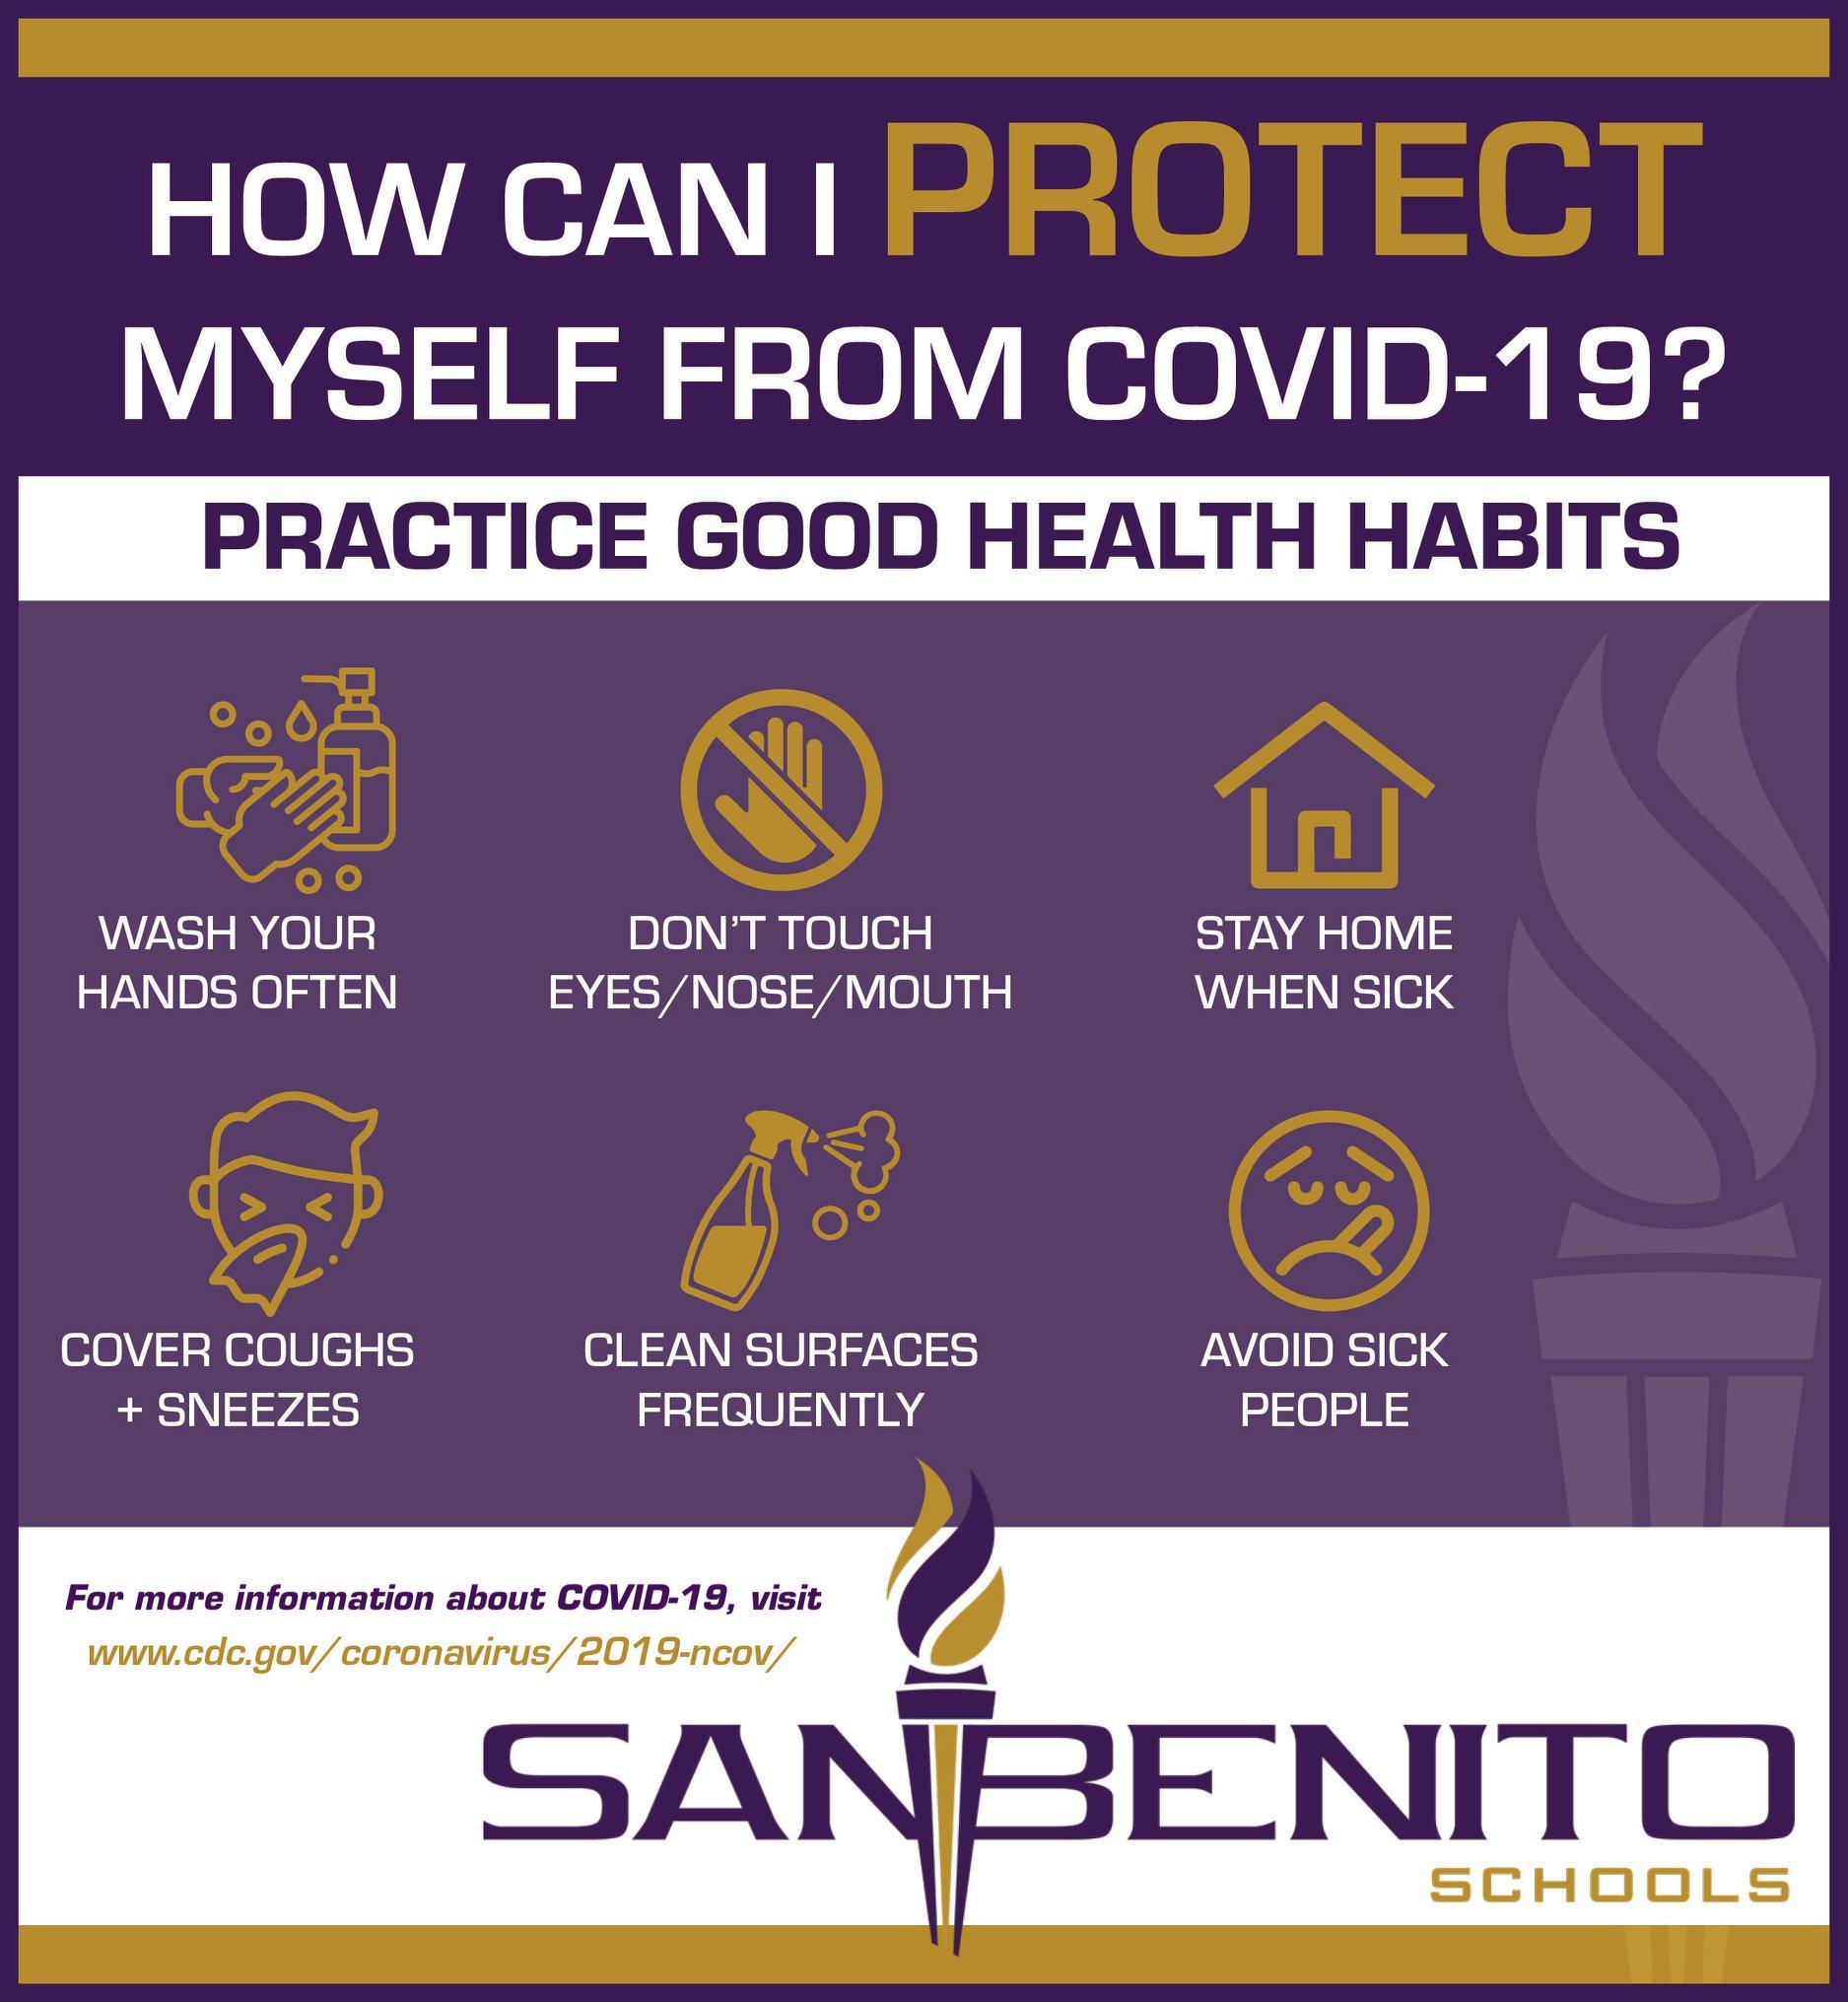 How can i protect myself from COVID-19